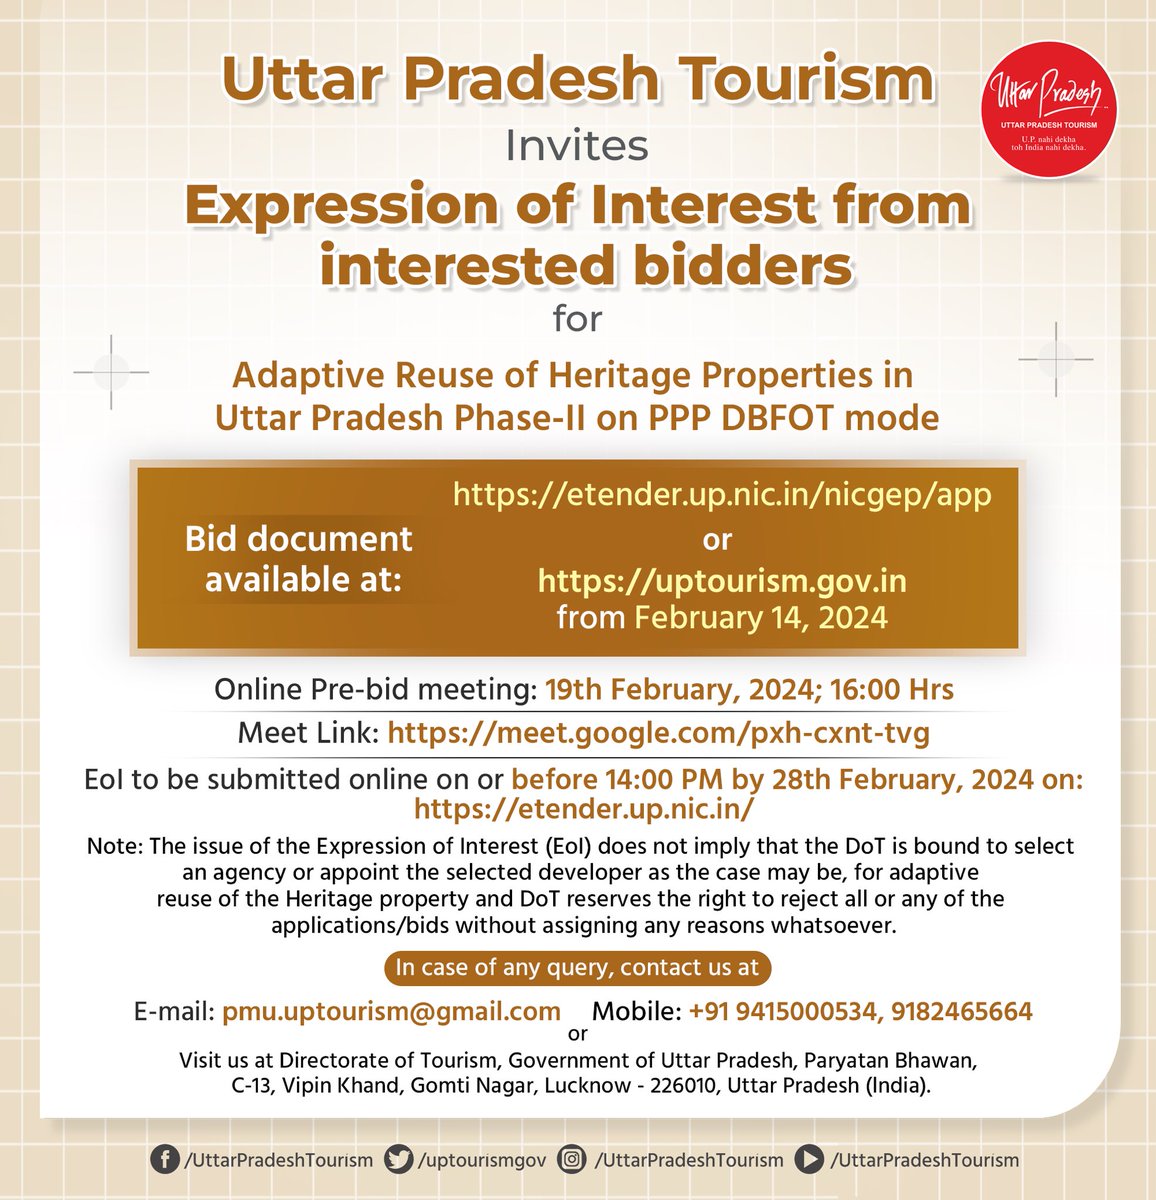 Uttar Pradesh Tourism is inviting Expression of Interest from interested bidders for #AdaptiveReuse of #HeritageProperties in #UttarPradesh Phase-II on #PPP DBFOT mode. More details as follows.

#UPTourism 

@MukeshMeshram @incredibleindia @_InvestUP